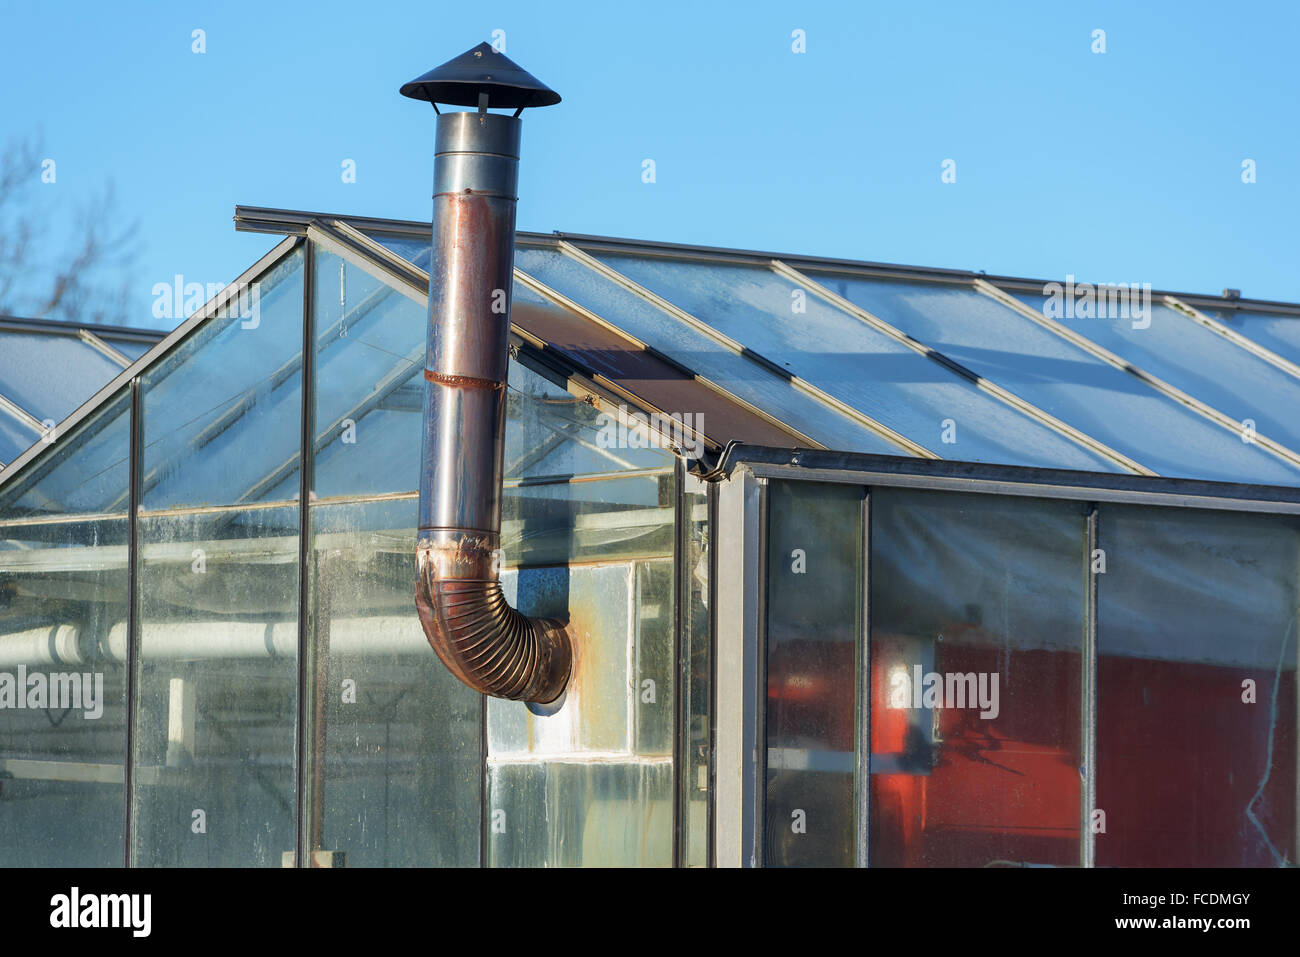 A small metal chimney stick out from a greenhouse with a heater inside. Stock Photo